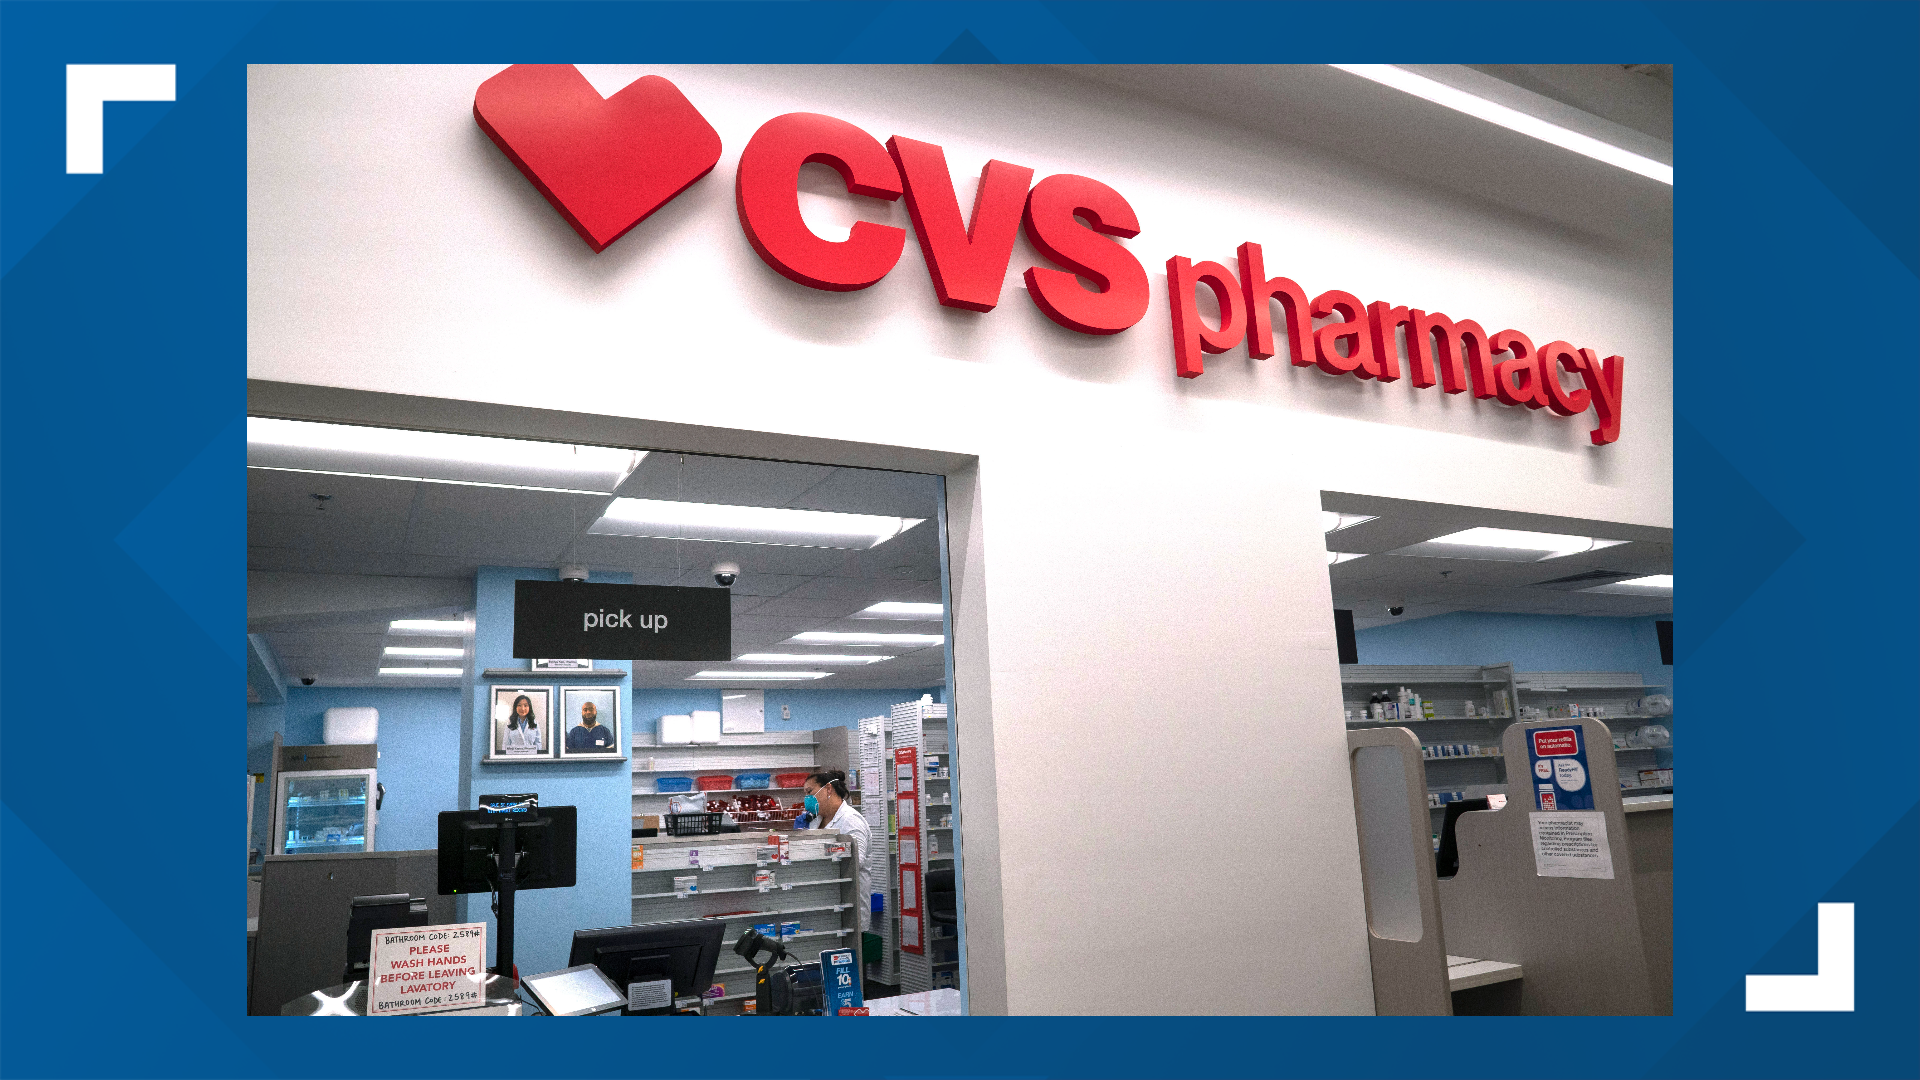 The pharmacy chain will offer the COVID-19 at six locations in the state to begin, including three in Cumberland, York, and Franklin Counties.